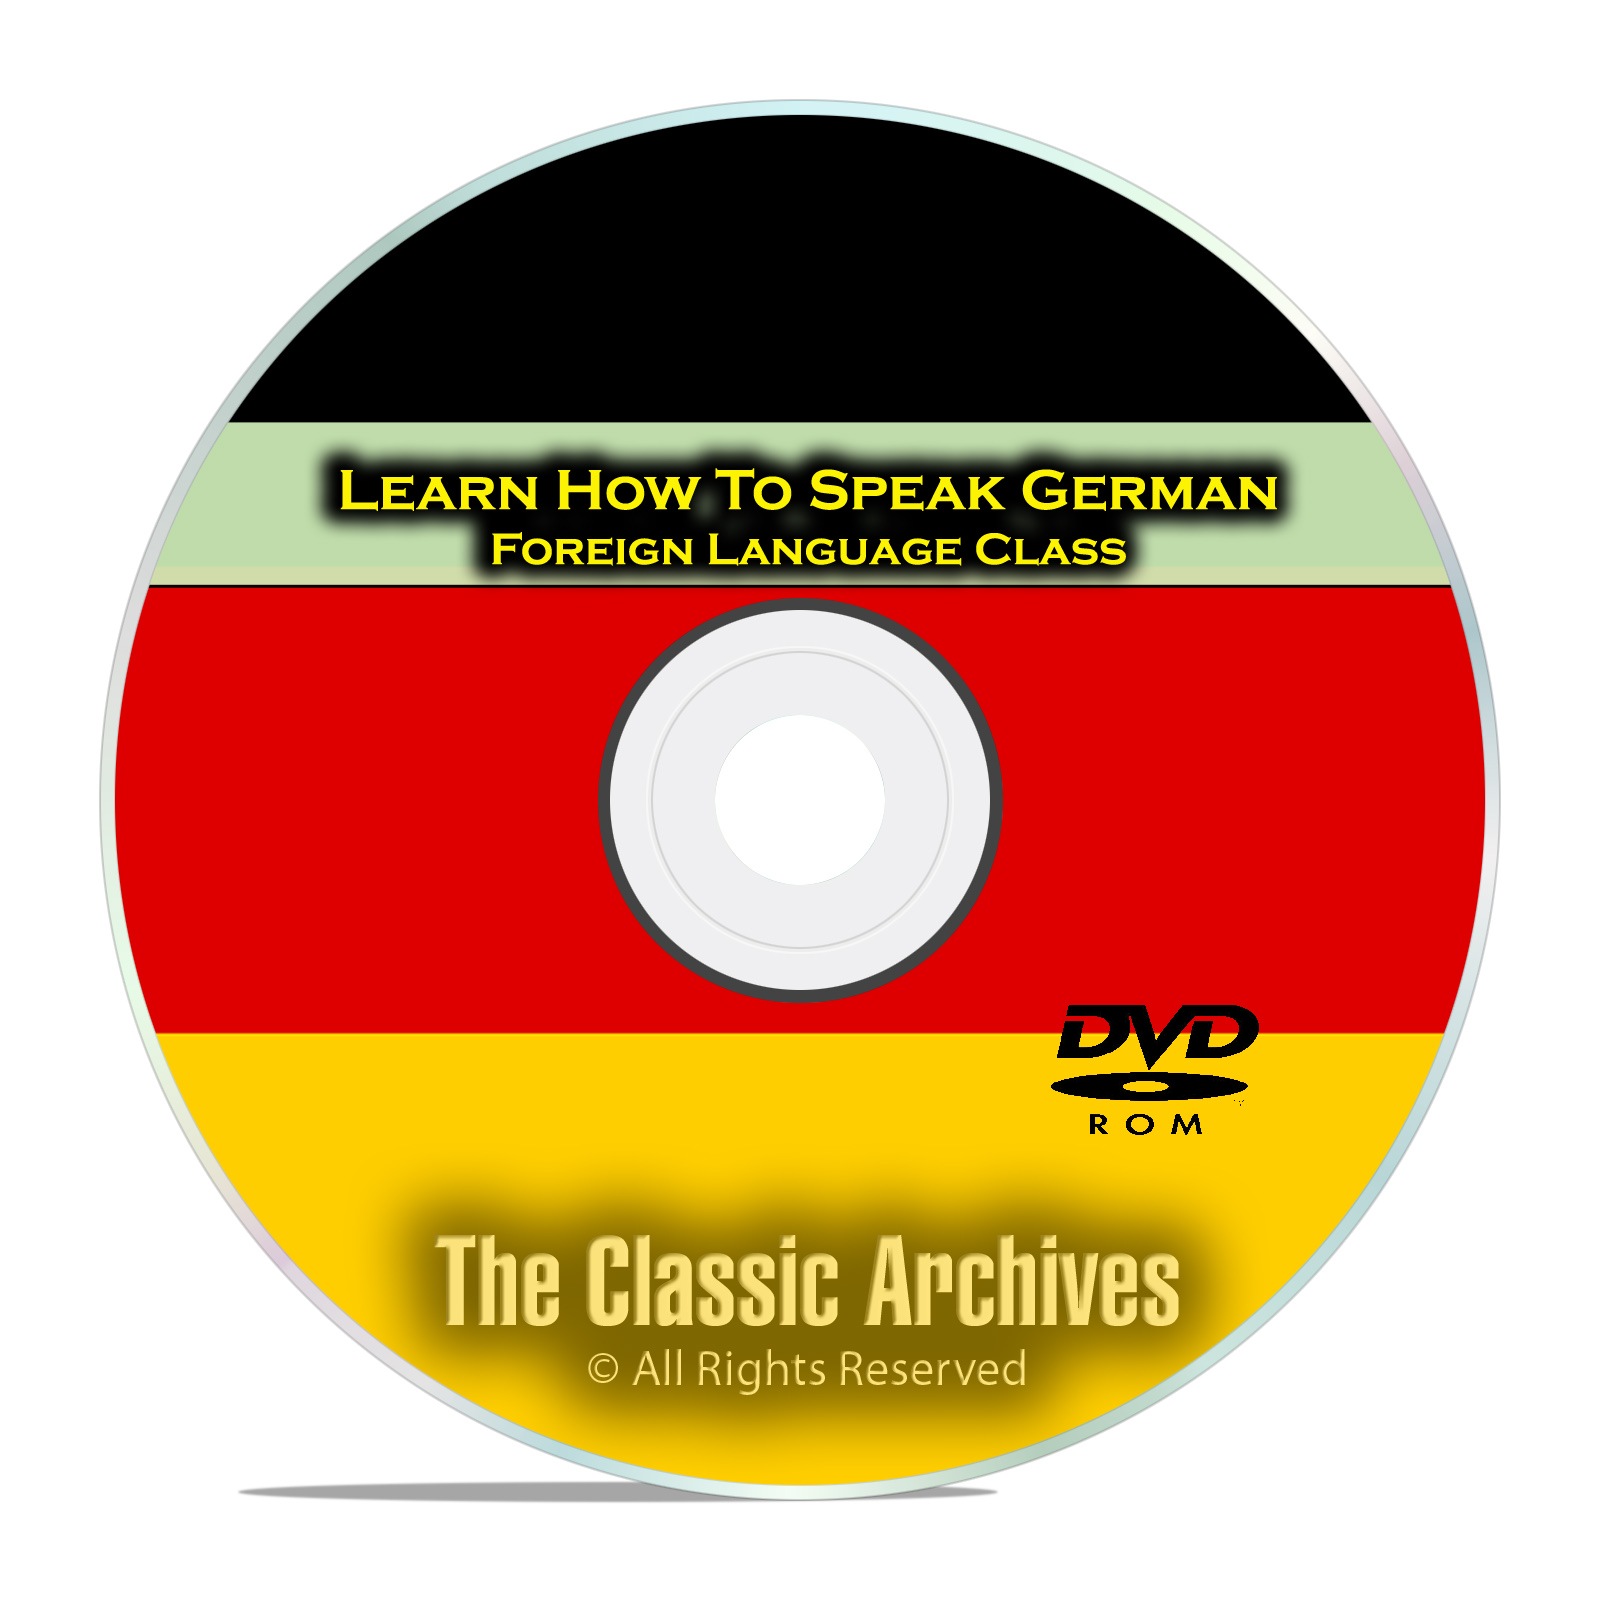 Learn How To Speak German, Fast Easy Foreign Language Training Course, DVD